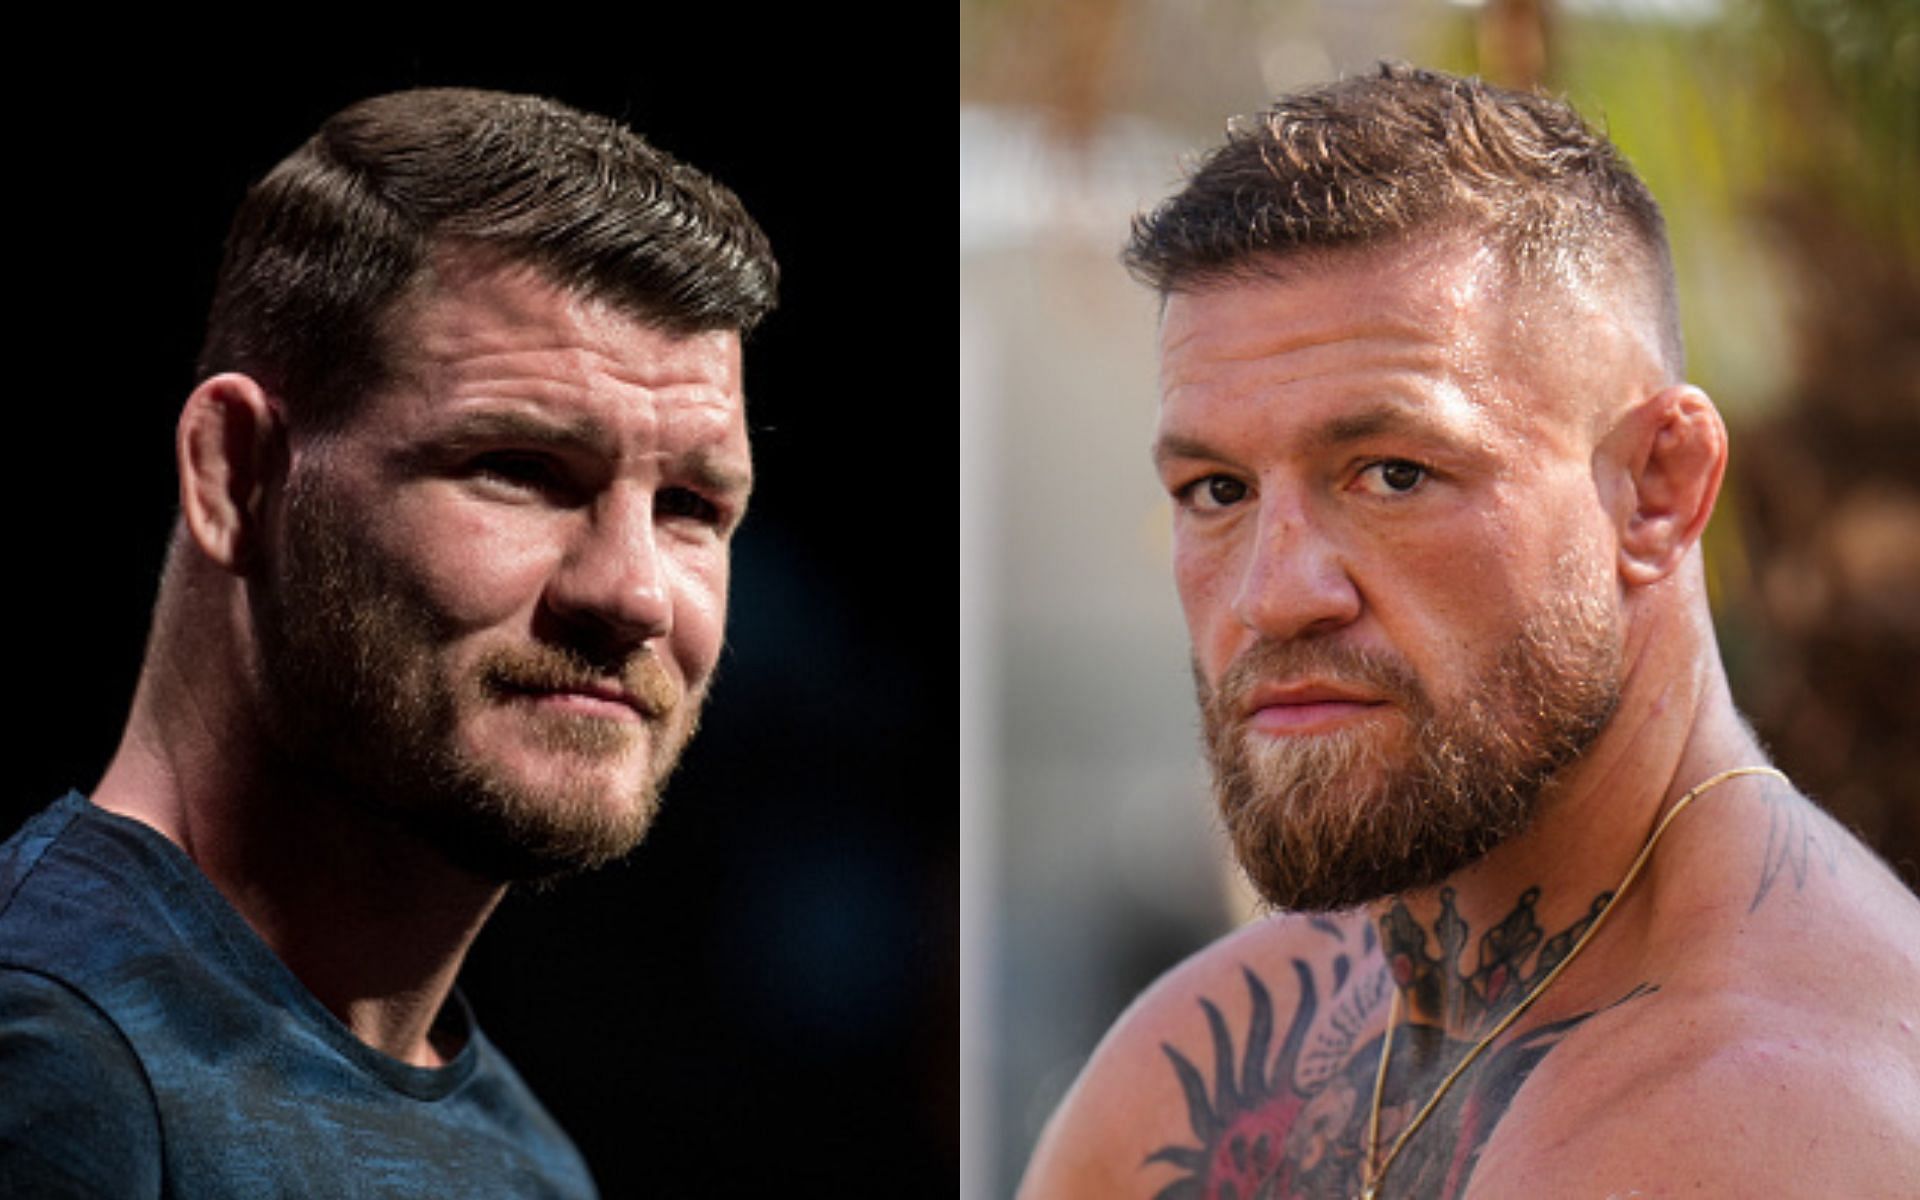 Michael Bisping (left), Conor McGregor (right)